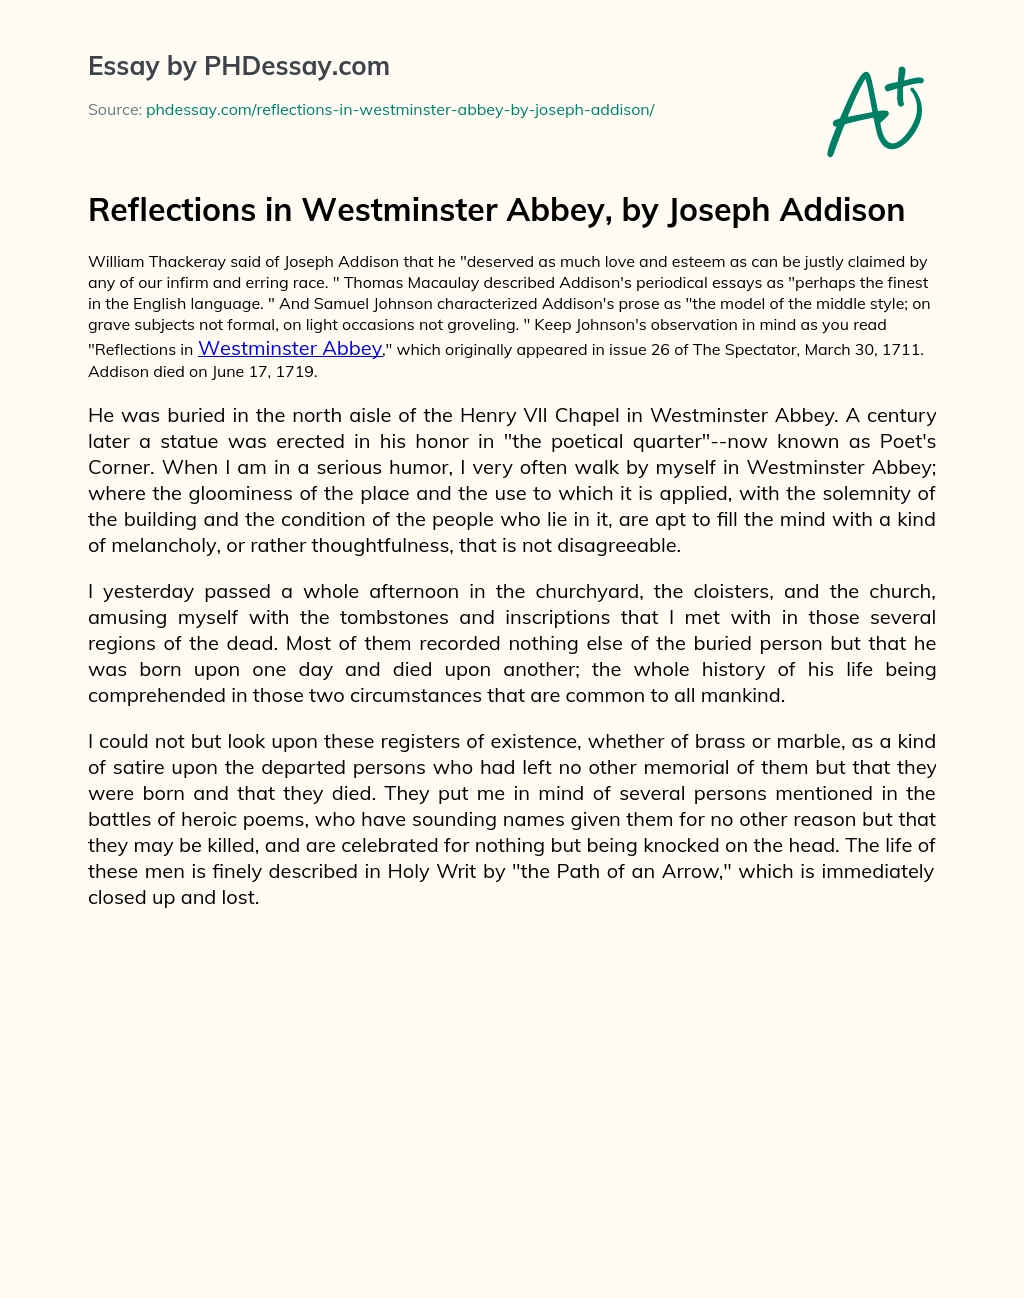 Reflections in Westminster Abbey, by Joseph Addison essay